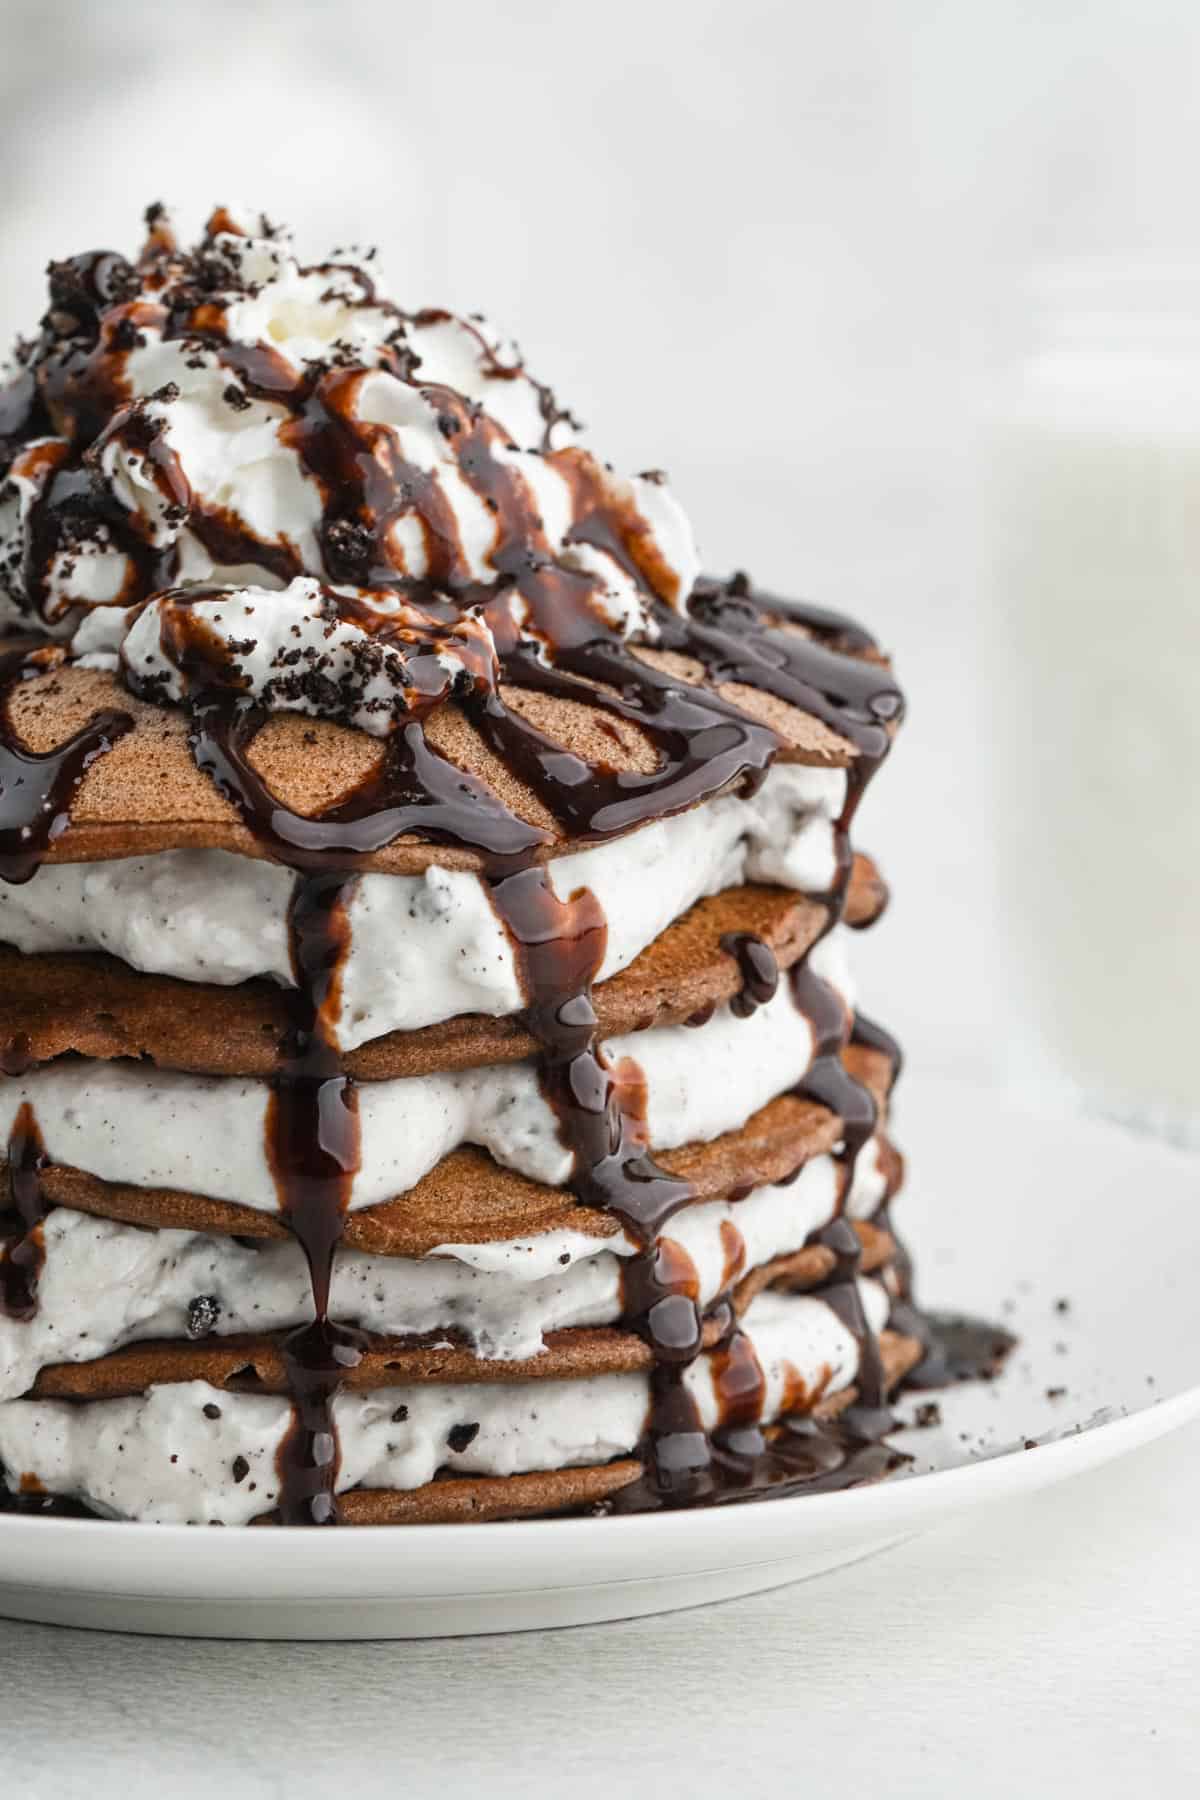 Stack of oreo pancakes topped with crumbled cookies and chocolate sauce, layered with whipped cream on a white plate.